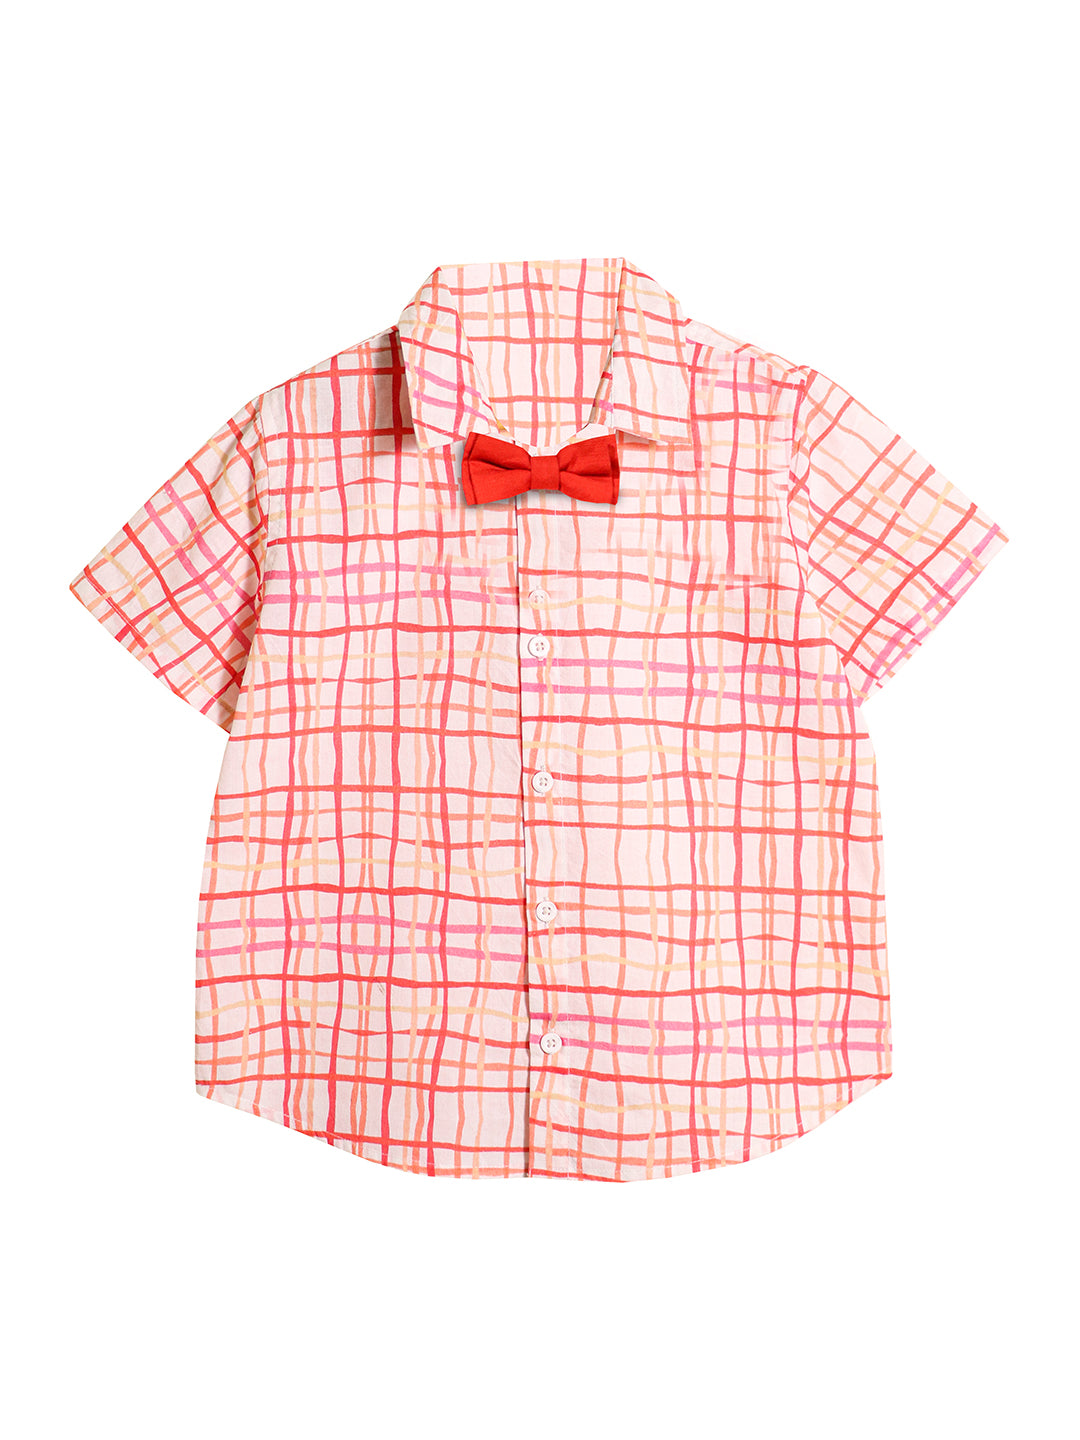 Boys Cotton Pink Check Shirt, Bow & Beige Pink Shorts